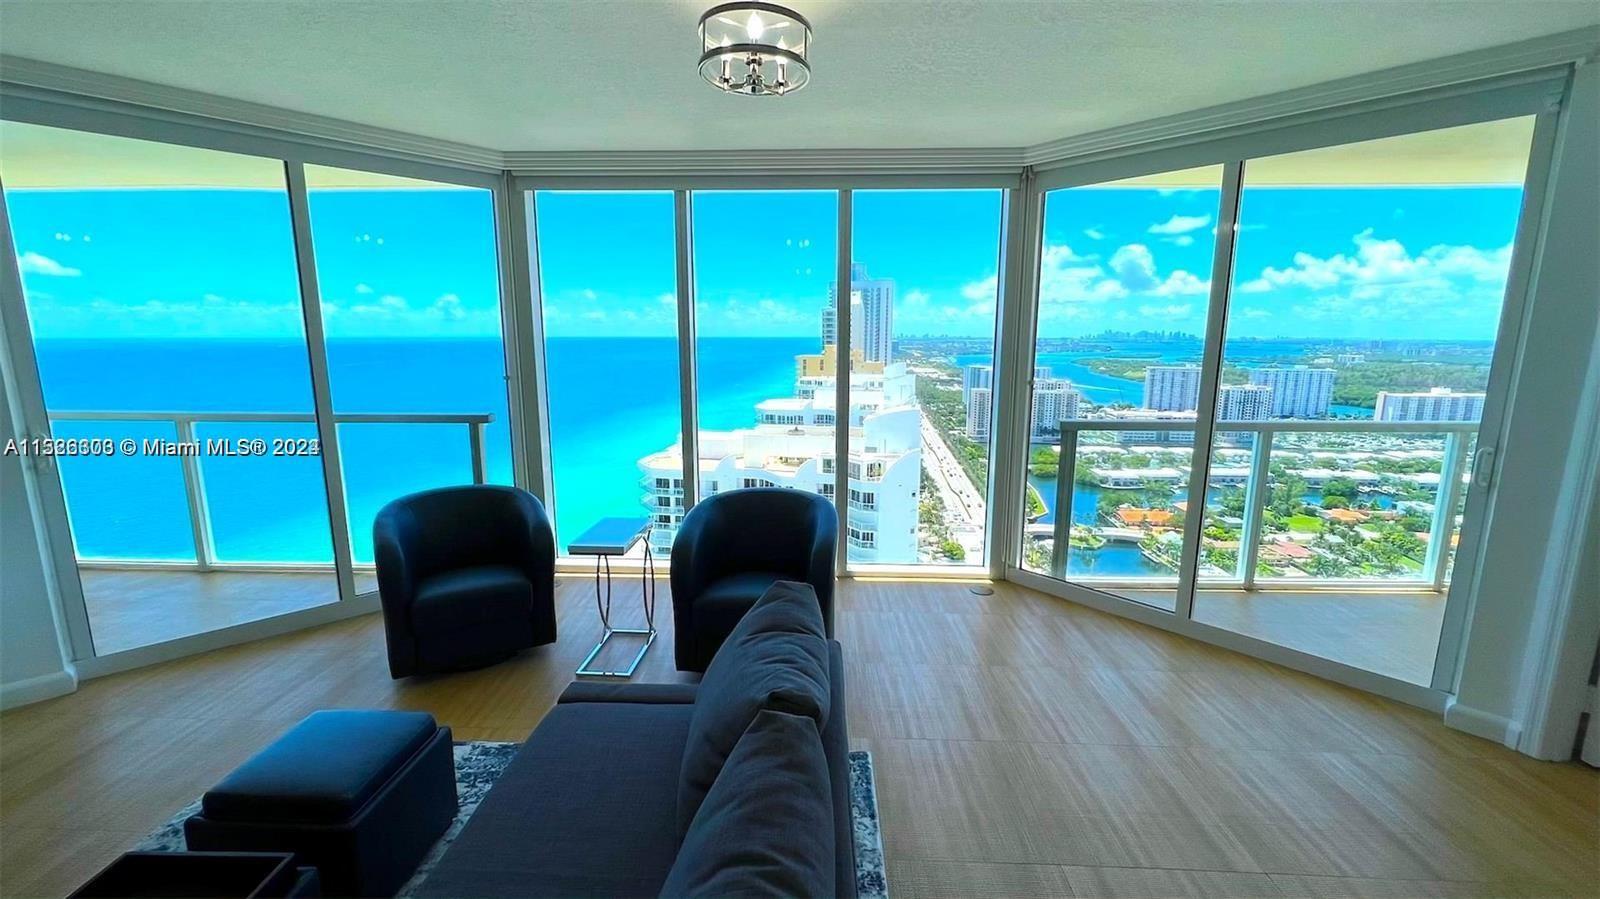 *AVAILABLE BEGINNING 3/21/24* LIVE ON TOP OF THE WORLD AT LA PERLA #3808. MODERN RENOVATED CORNER UNIT w/WRAP-AROUND BALCONY ON ONE OF THE HIGHEST FLOORS WITH AMAZING UNOBSTRUCTED OCEAN AND INTRACOASTAL VIEWS. FULL-SERVICE BUILDING: 24-HOUR VALET, SECURITY/CONCIERGE, OCEANFRONT HEATED POOL + JACUZZI, POOL + BEACH SERVICE w/ CHAIRS, UMBRELLAS AND TOWELS. FITNESS CENTER, SAUNA, and BUSINESS CENTER. MASTER BEDROOM w/ NEW KING-SIZE BED. 2ND BEDROOM: NEW QUEEN SIZE BED (PLUS 2 ADD'L SINGLE BEDS). EXCELLENT LOCATION! WALKING DISTANCE TO SHOPS, SUPERMARKETS, RESTAURANTS, LOCAL ATTRACTIONS, AIRPORTS, AND MORE. RENTAL RATE BASED ON SEASON / LENGTH OF STAY. AVAILABLE FOR SHORT TERM & LONG TERM RENT.